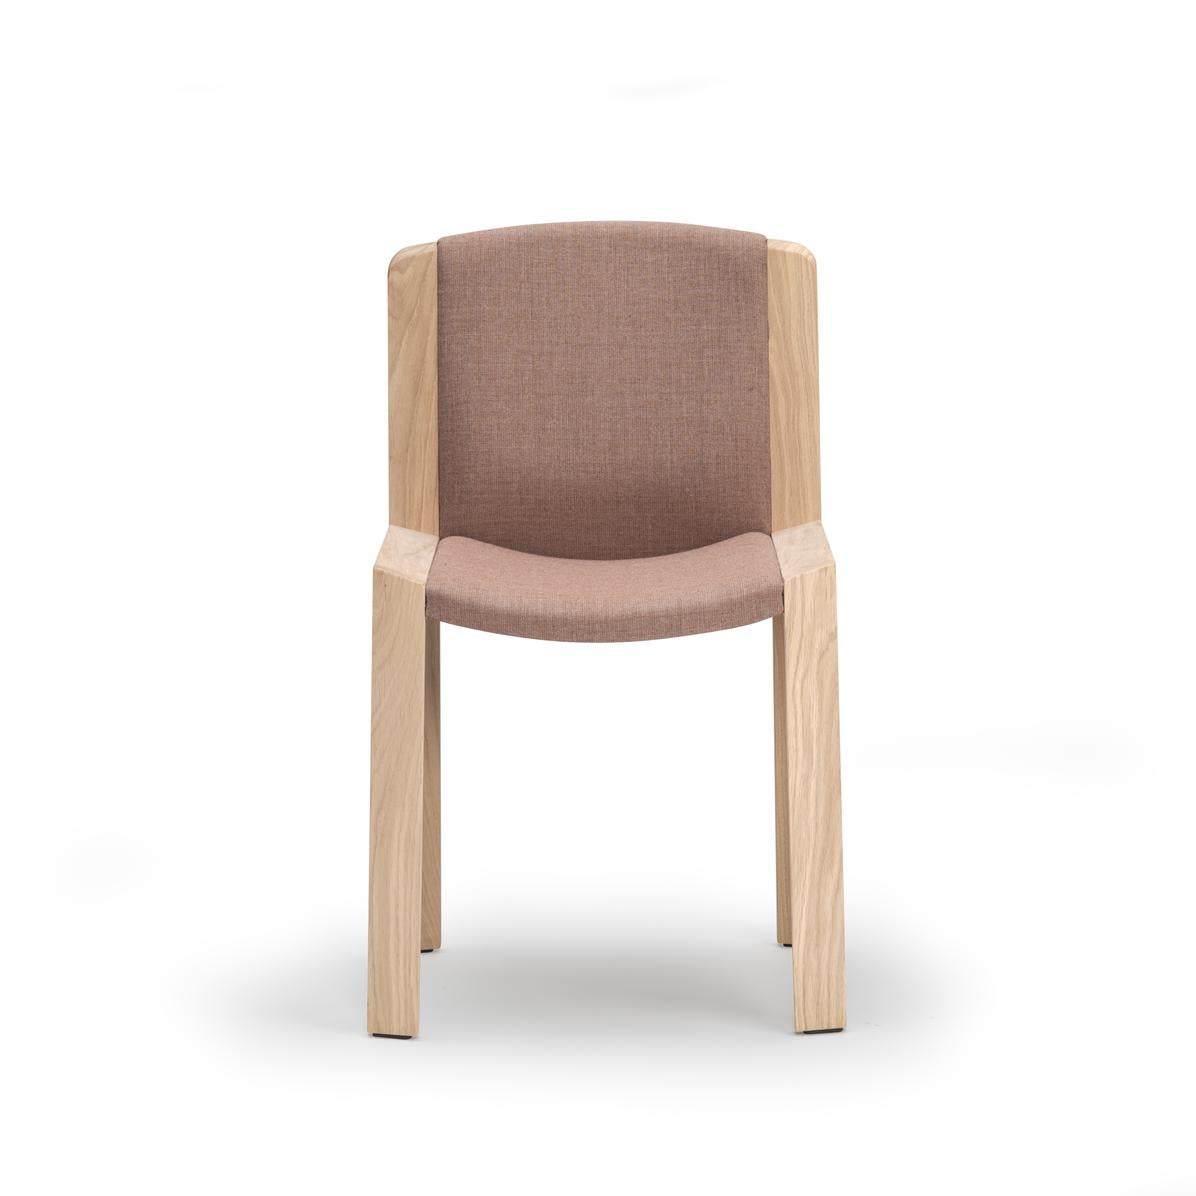 Joe Colombo 'Chair 300' Wood and Sørensen Leather by Karakter For Sale 10